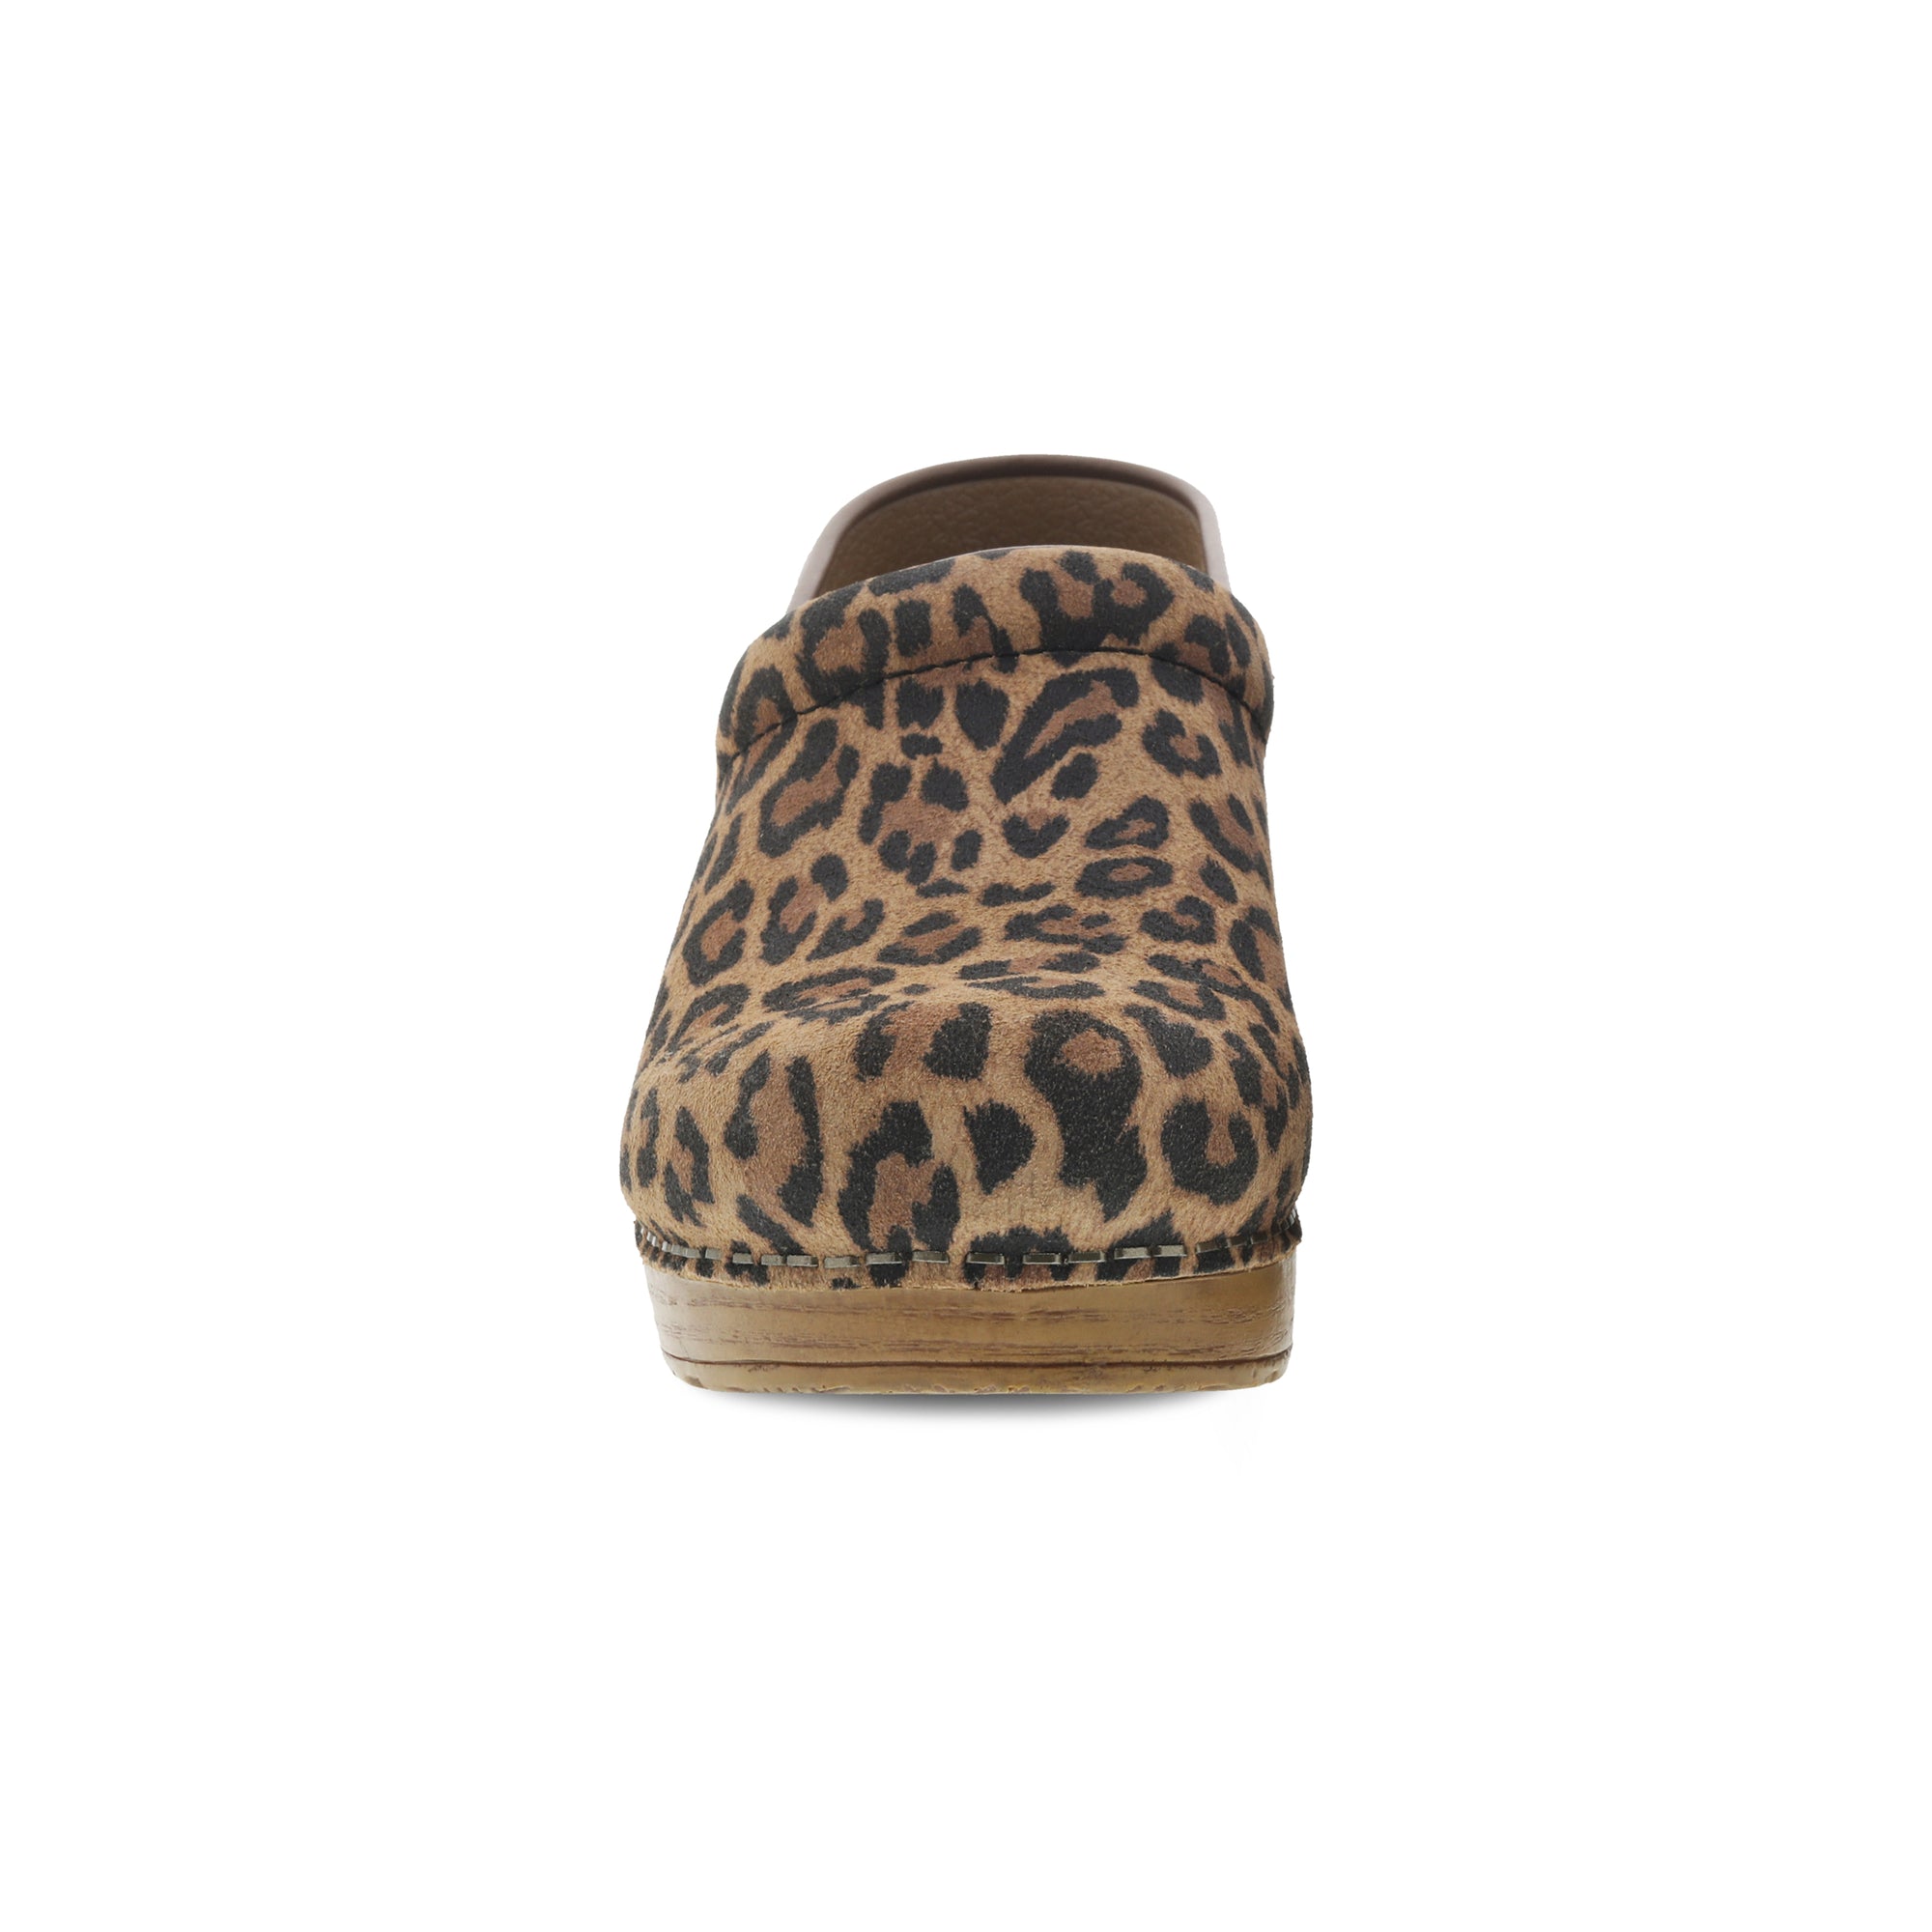 Toe image of Professional Leopard Suede